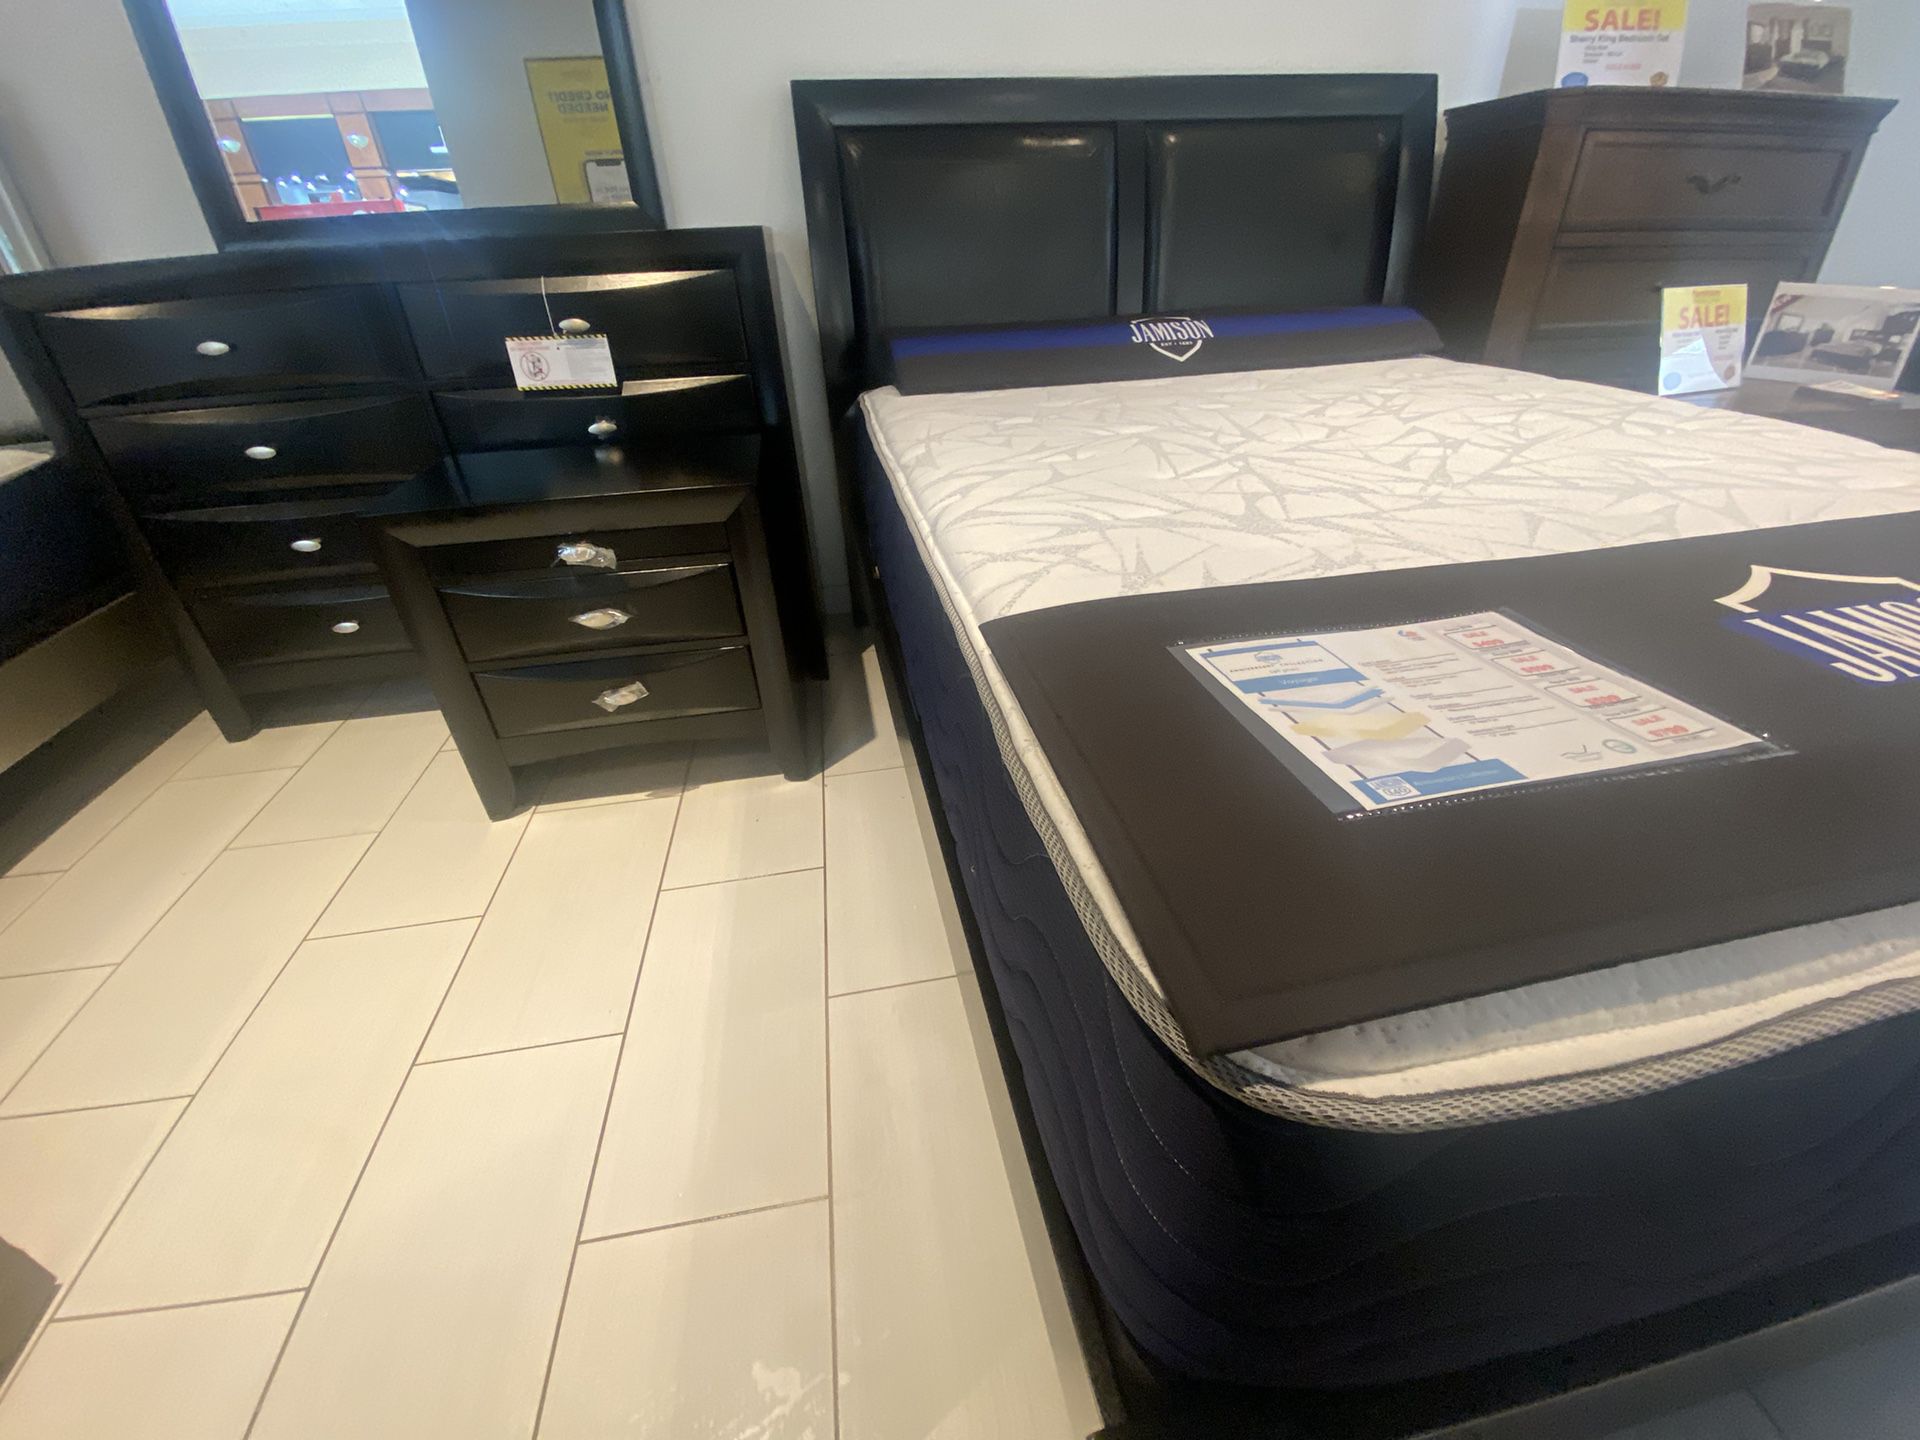 BEDROOM SETS! SEXY Looks! HOME LOOKS! WE SELL FOR LESS